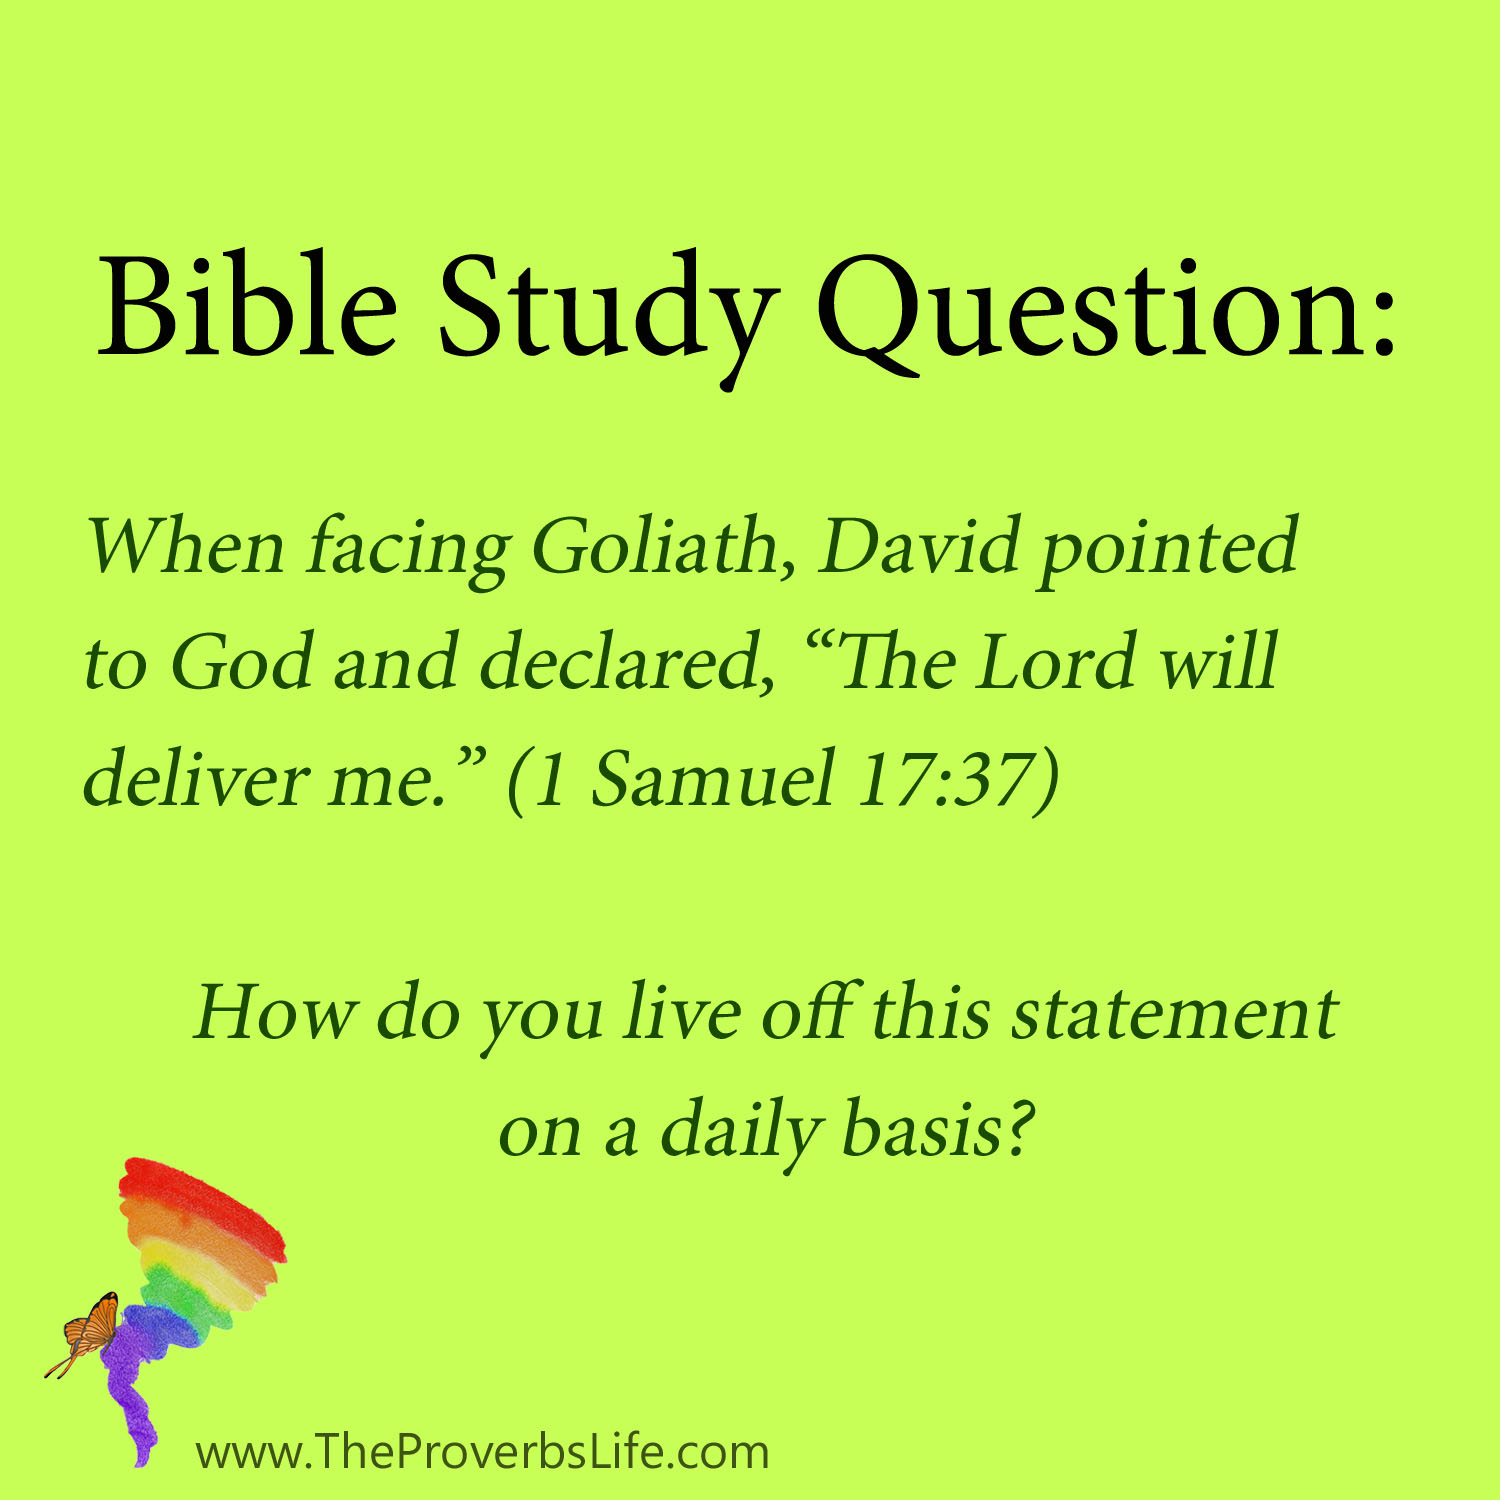 Bible study question - the Lord will deliver me